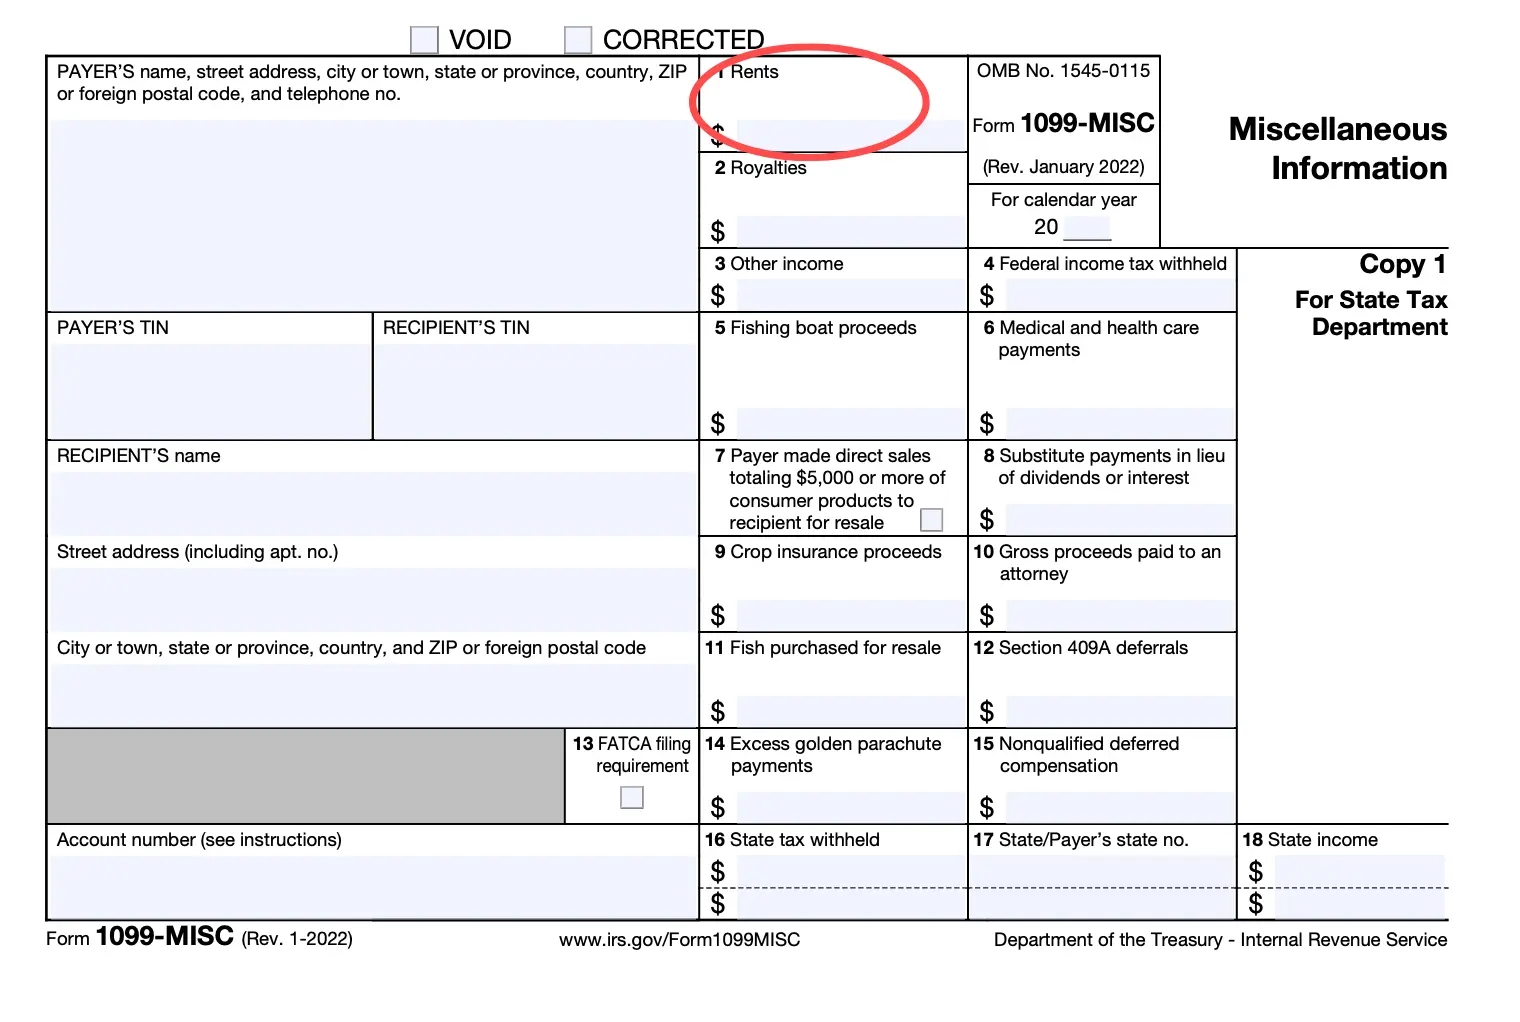 Image of Form 1099-MISC for reporting miscellaneous income and taxes. Includes fields for payer and recipient information, income types, and state tax withheld. Relevant for self-employed, freelancers, and those receiving miscellaneous income.